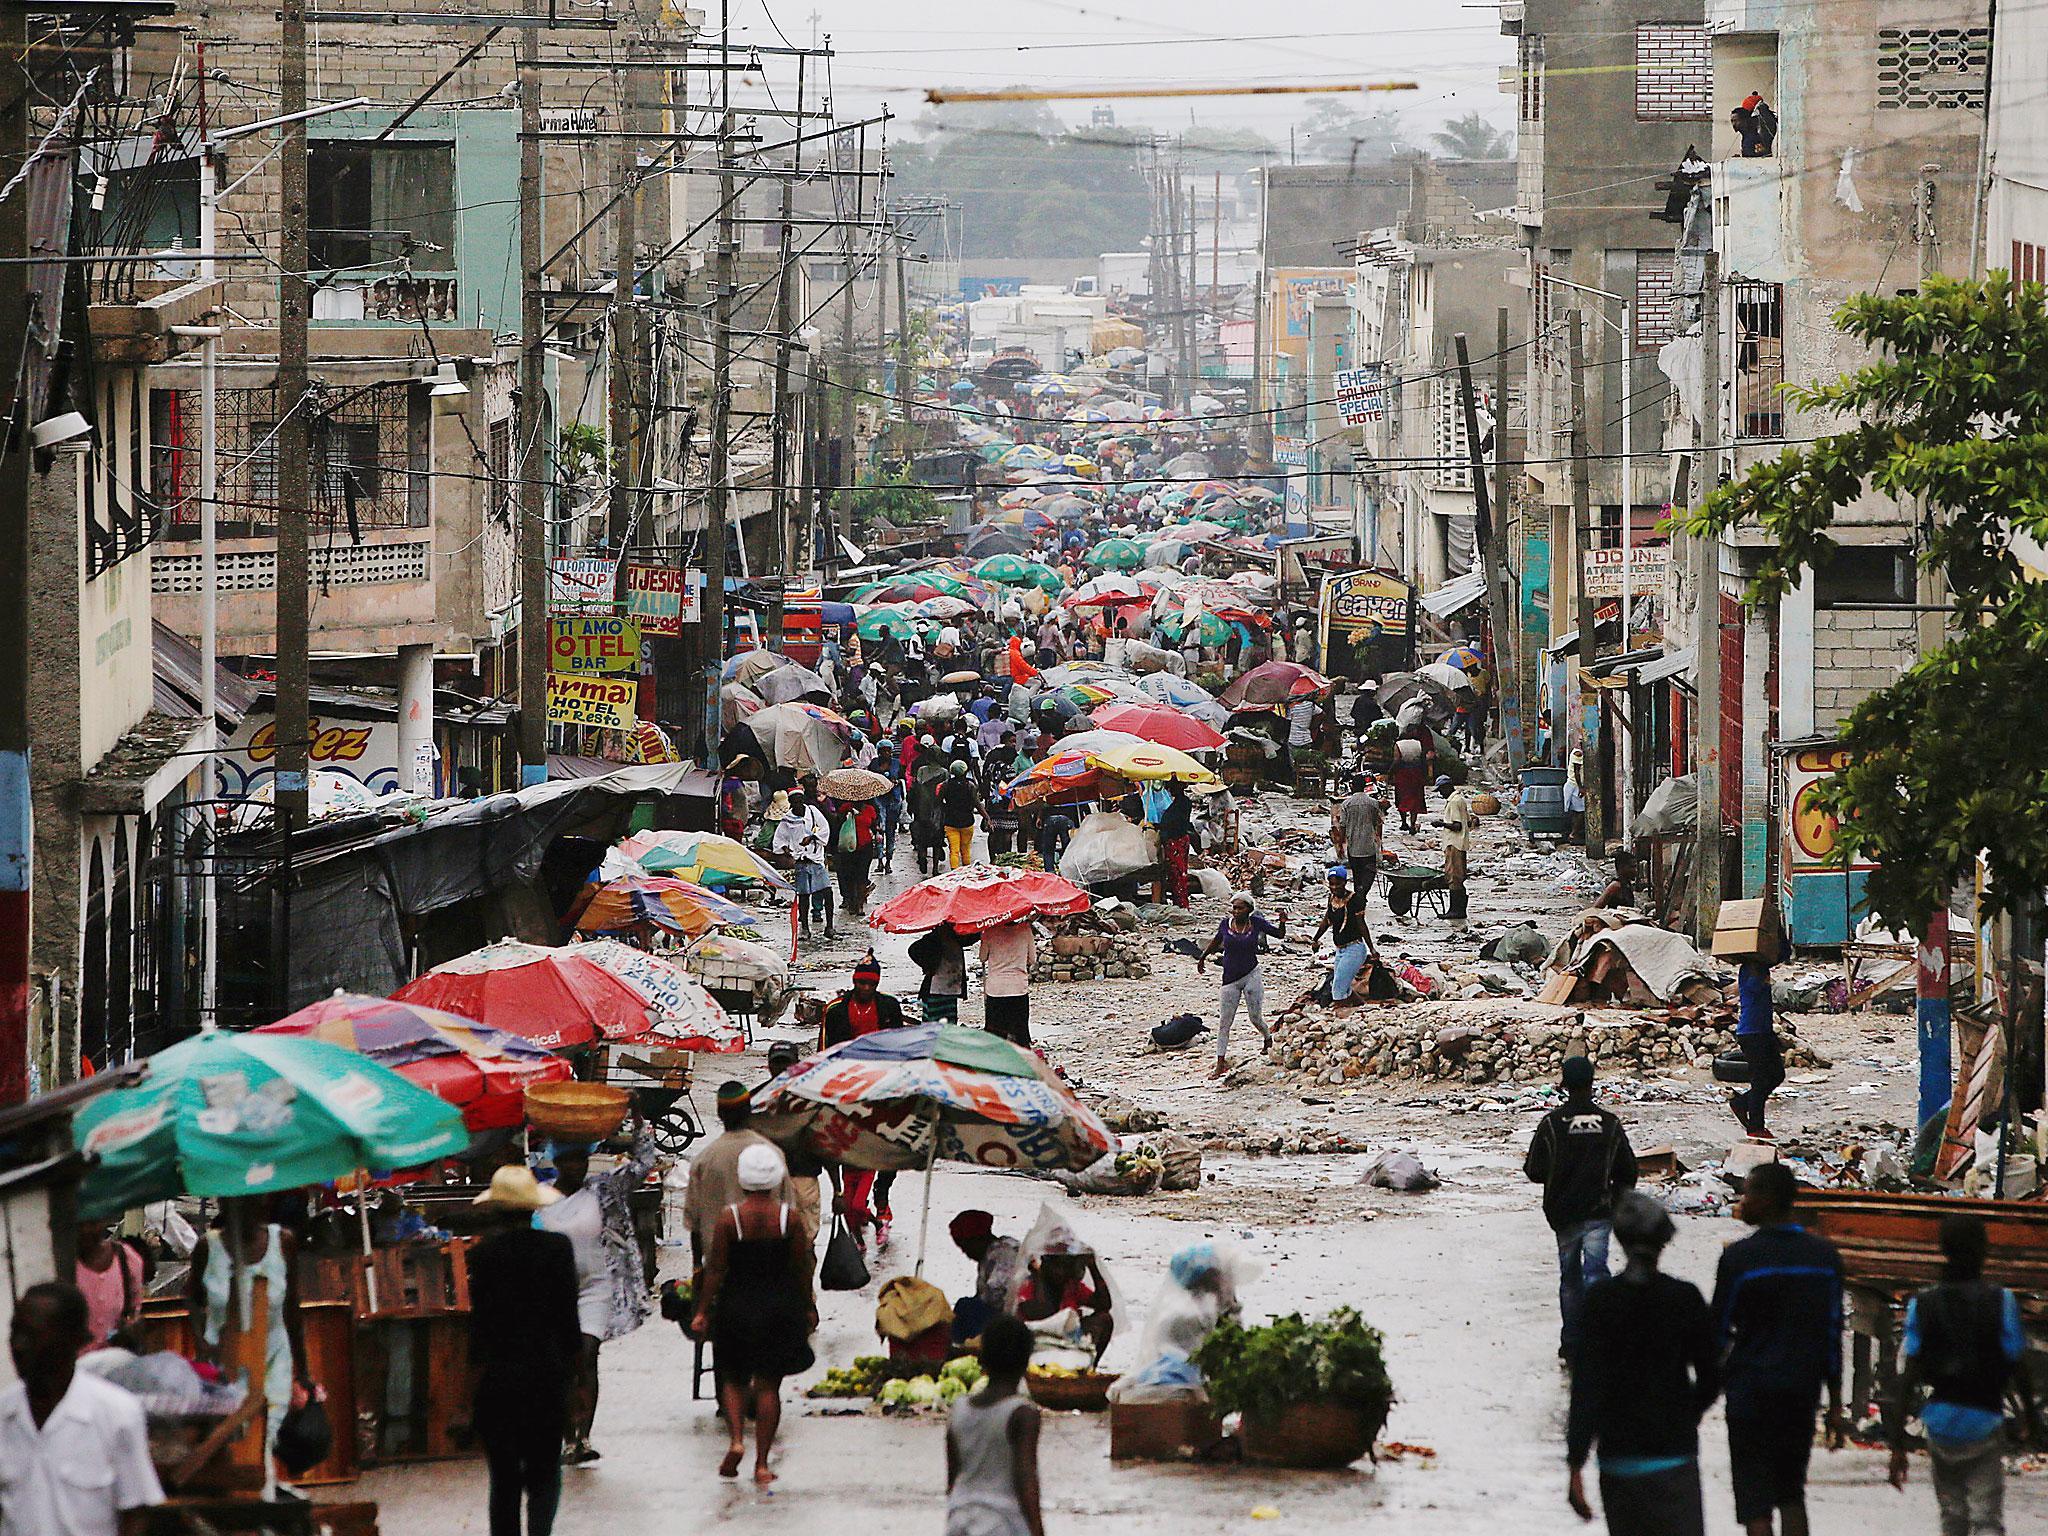 Vendors sell their goods on the street while Hurricane Matthew approaches in Port-au-Prince, Haiti